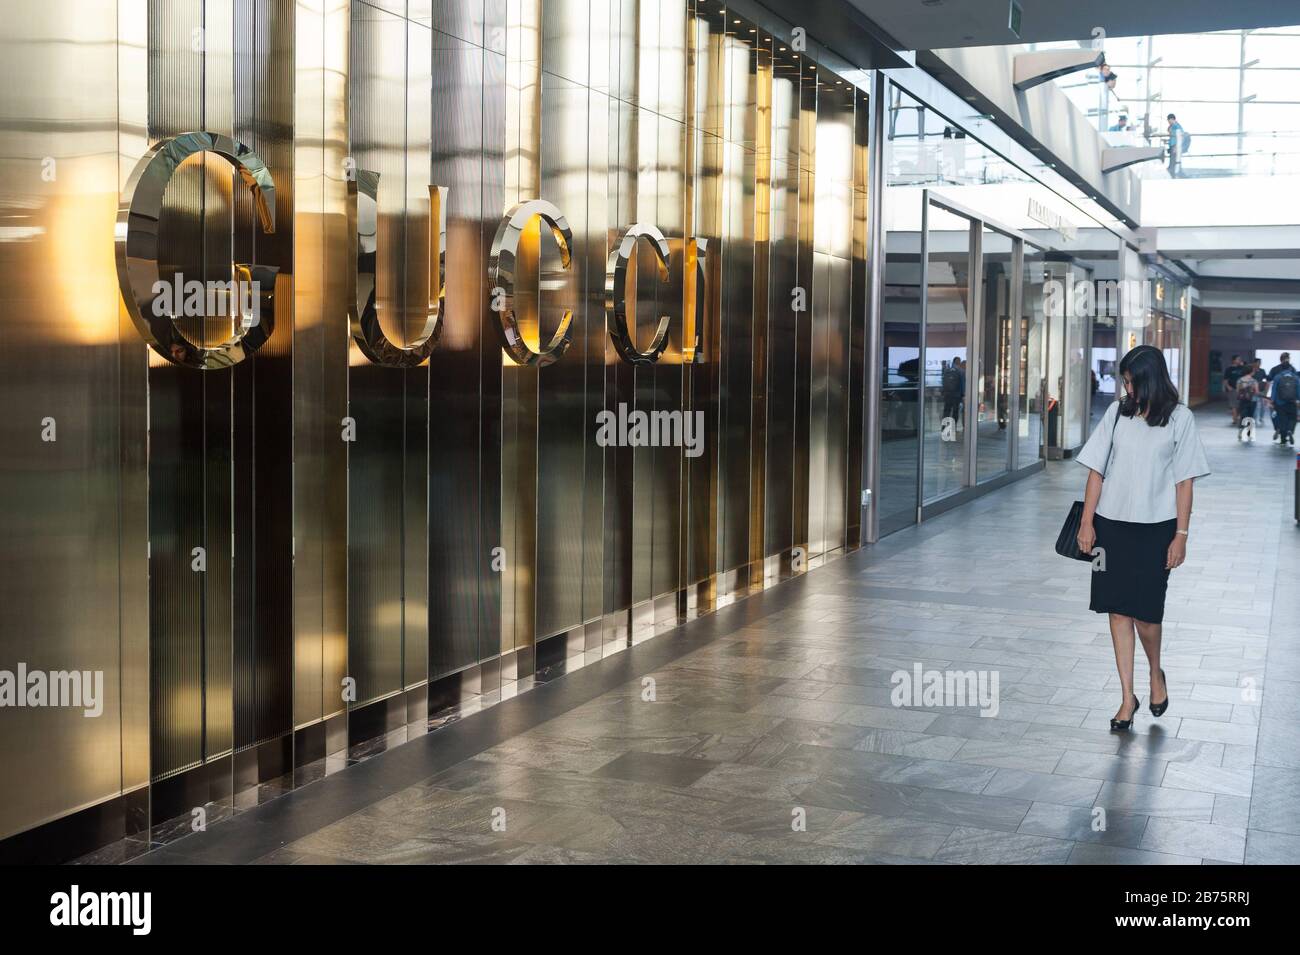 25.05.2017, Singapore, Republic of Singapore, Asia - A woman walks past a  store of the luxury brand Gucci in the shopping mall 'The Shoppes' at  Marina Bay Sands. In addition to luxury